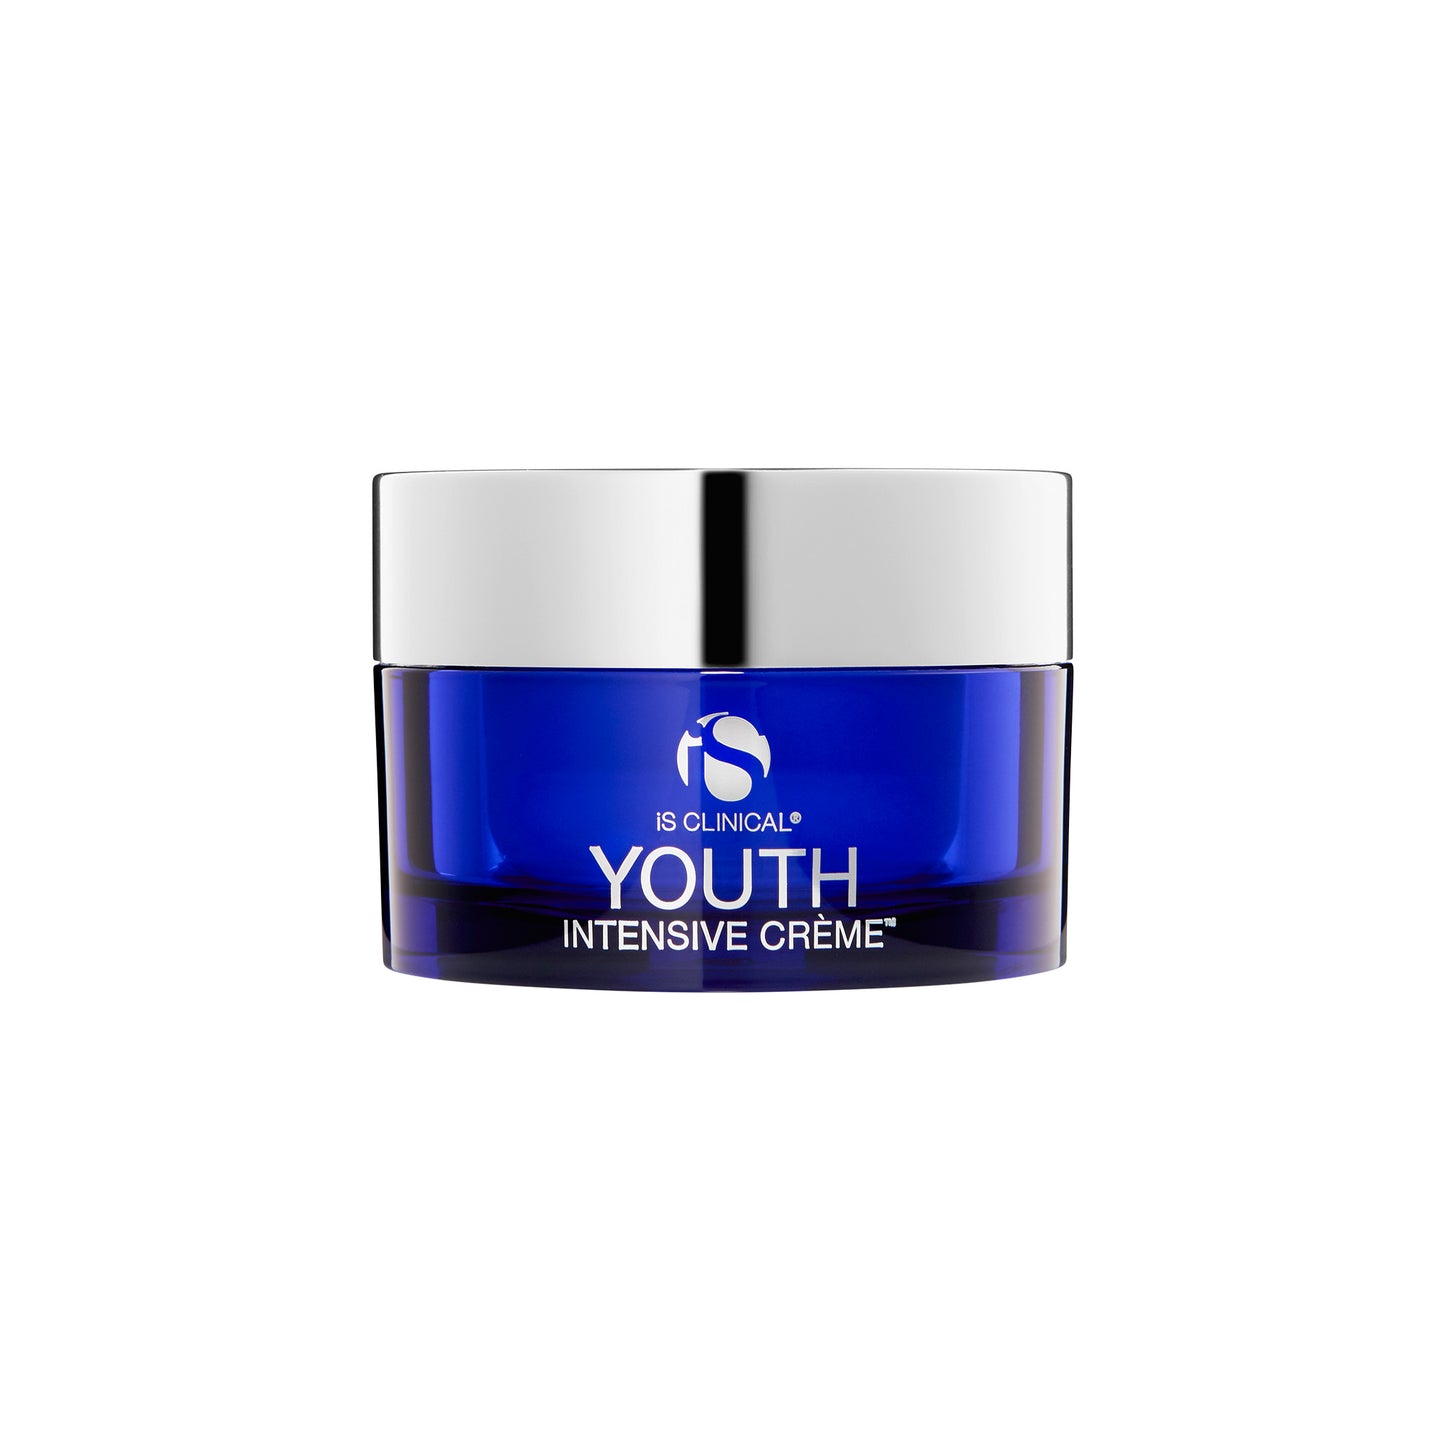 Youth Intensive Crème®